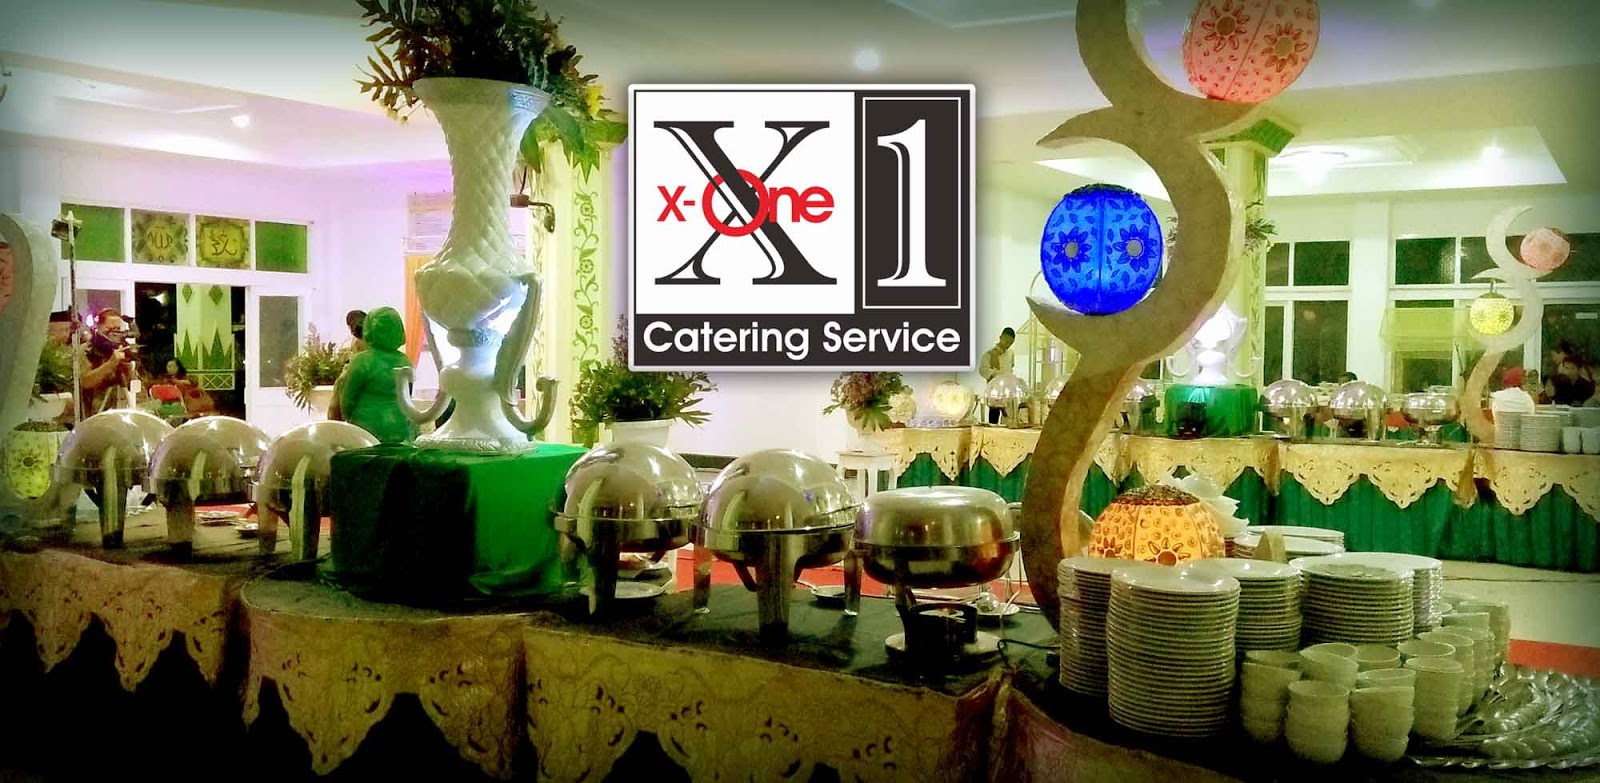 X-One Catering